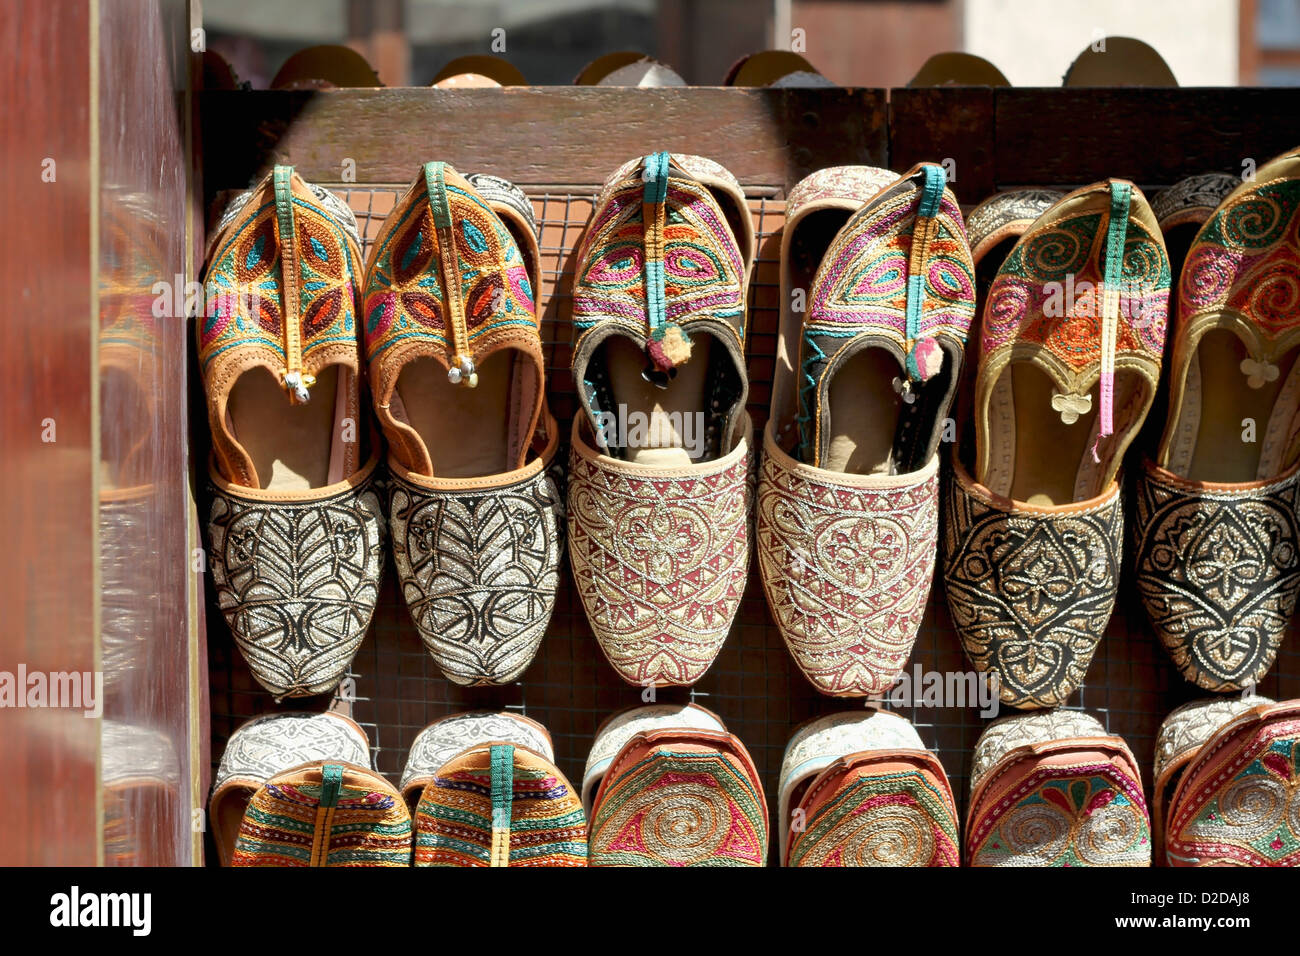 Arabian Slippers Souvenir High Resolution Stock Photography and Images -  Alamy